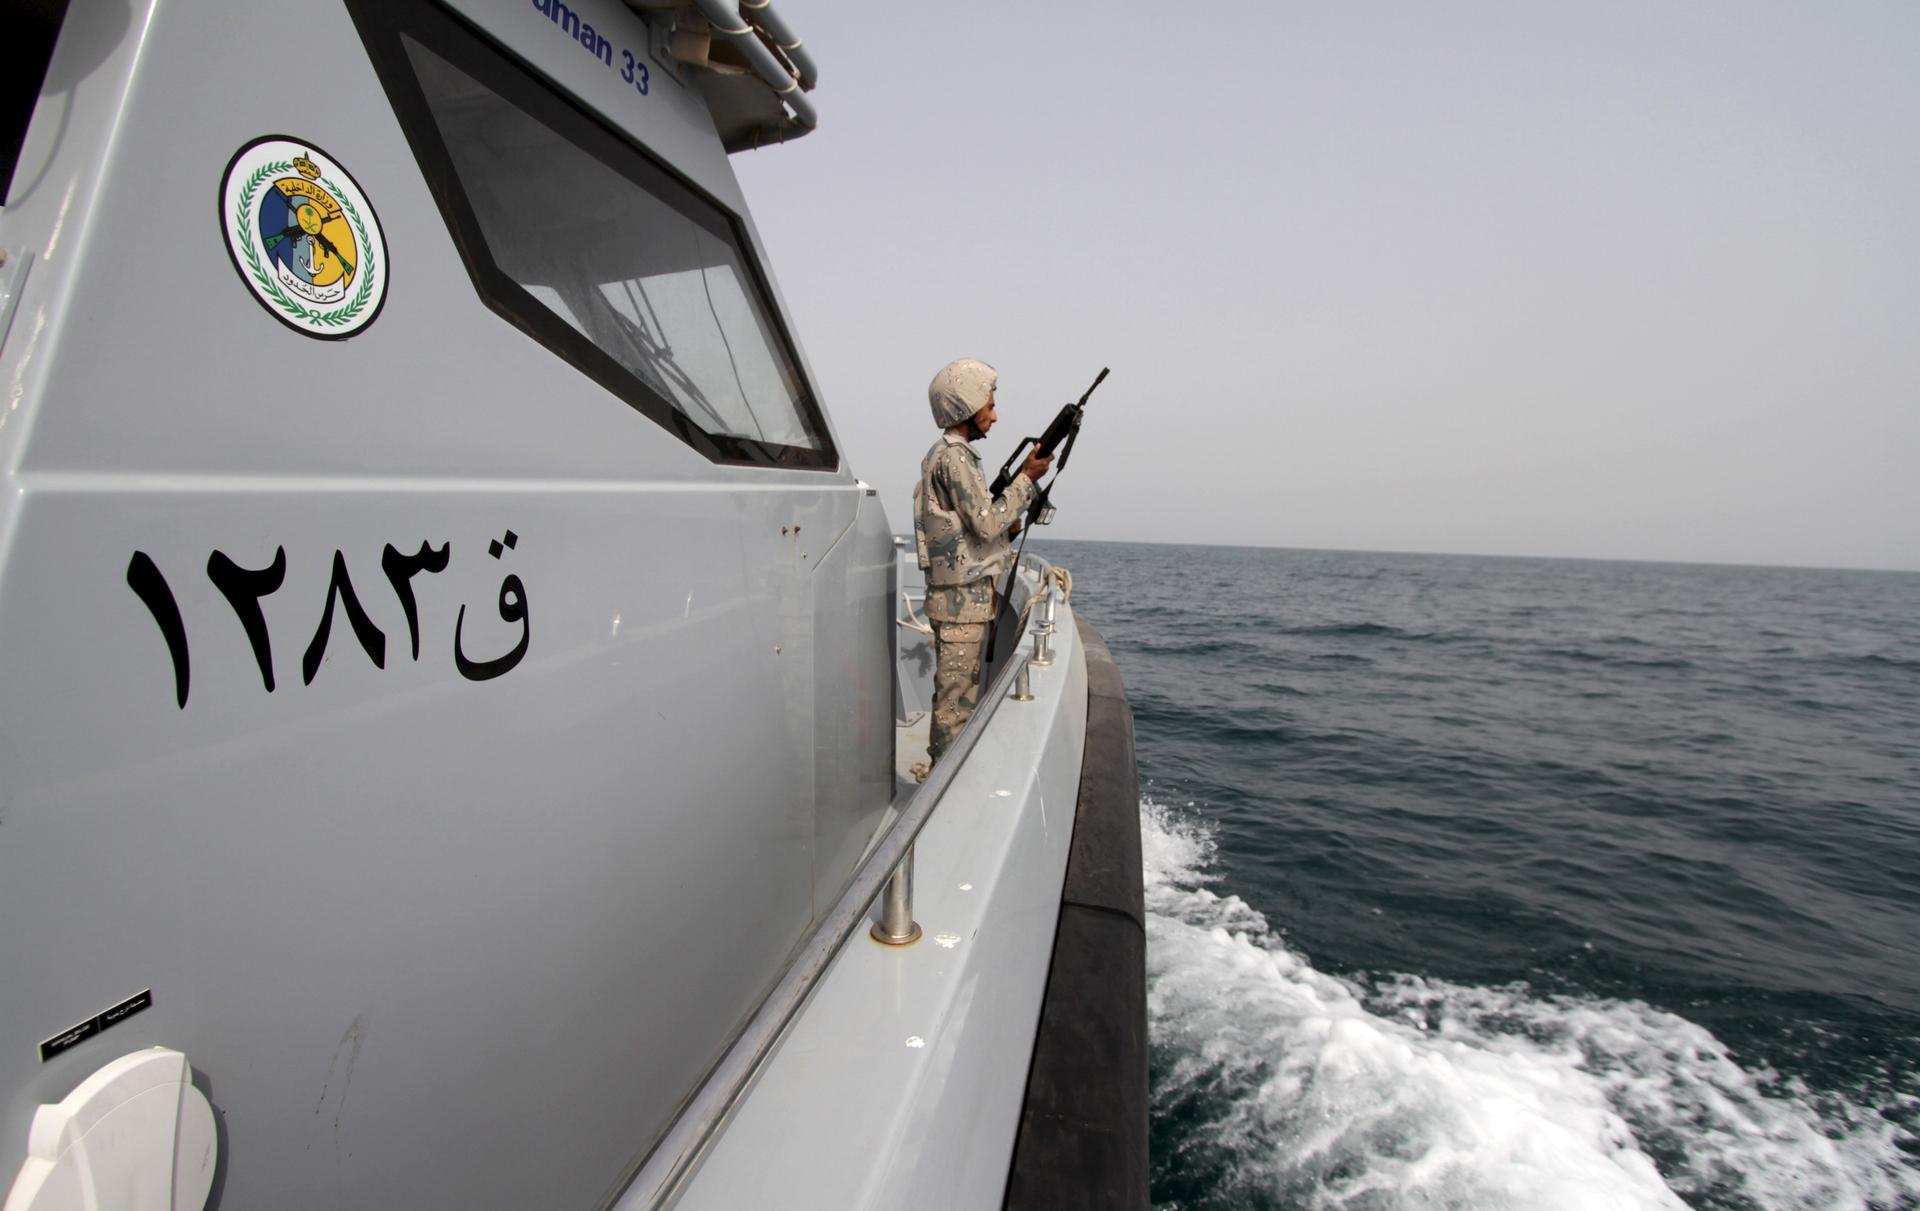 A Saudi border guard watches as he stands in a boat off the coast of the Red Sea on Saudi Arabia's maritime border with Yemen, near Jizan April 8, 2015